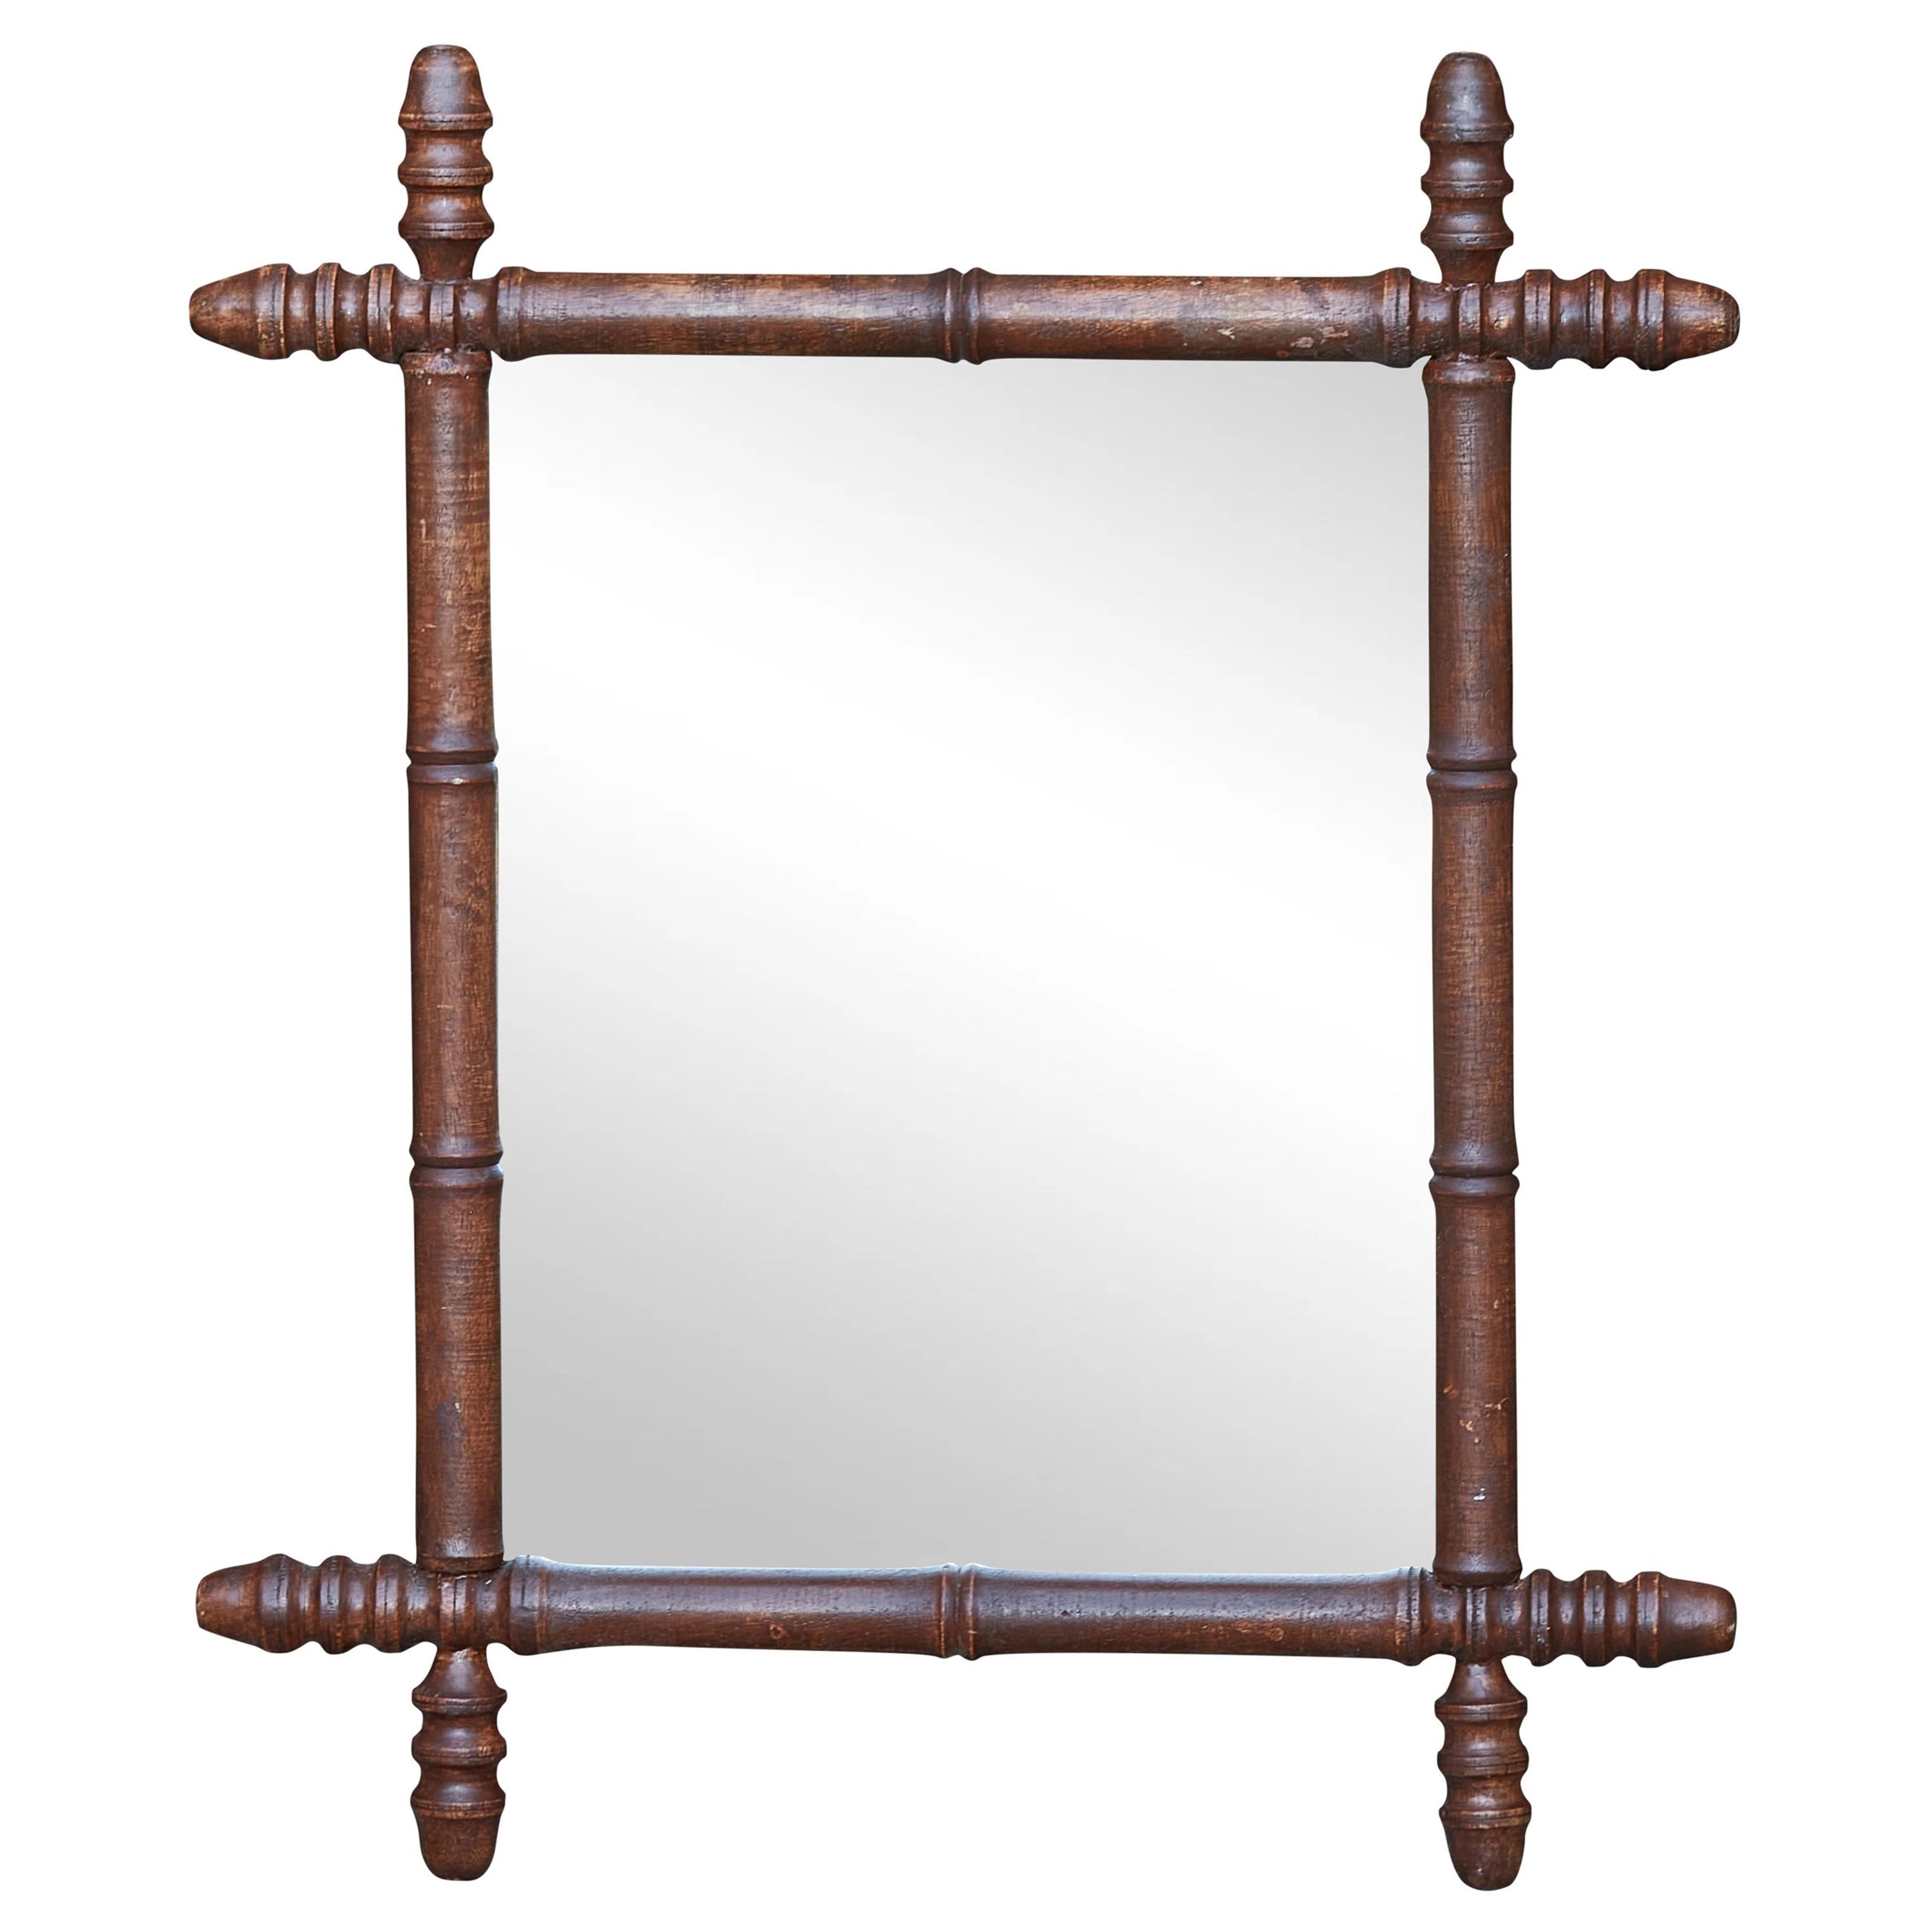 French Faux-Bamboo Turn of the Century Mirror with Reeded Accents, circa 1900